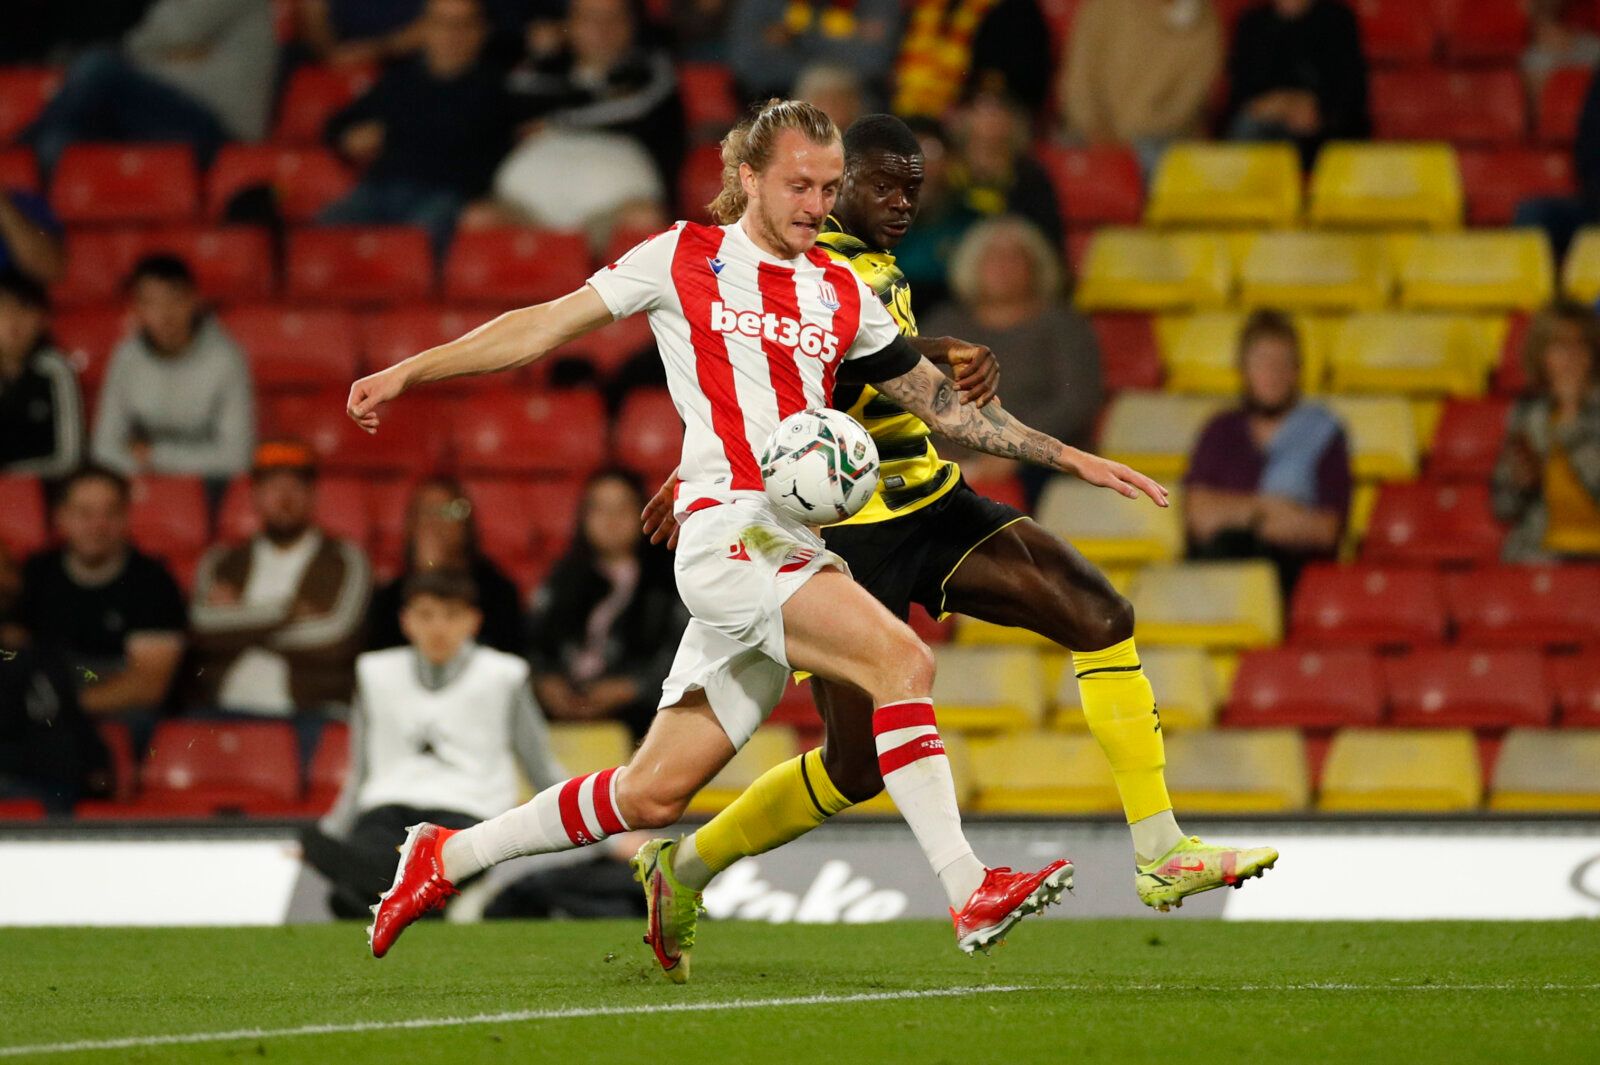 Soccer Football - Carabao Cup - Third Round - Watford v Stoke City - Vicarage Road, Watford, Britain - September 21, 2021 Stoke's Ben Wilmot in action with Watford's Ken Sema Action Images via Reuters/Andrew Boyers EDITORIAL USE ONLY. No use with unauthorized audio, video, data, fixture lists, club/league logos or 'live' services. Online in-match use limited to 75 images, no video emulation. No use in betting, games or single club /league/player publications.  Please contact your account represe